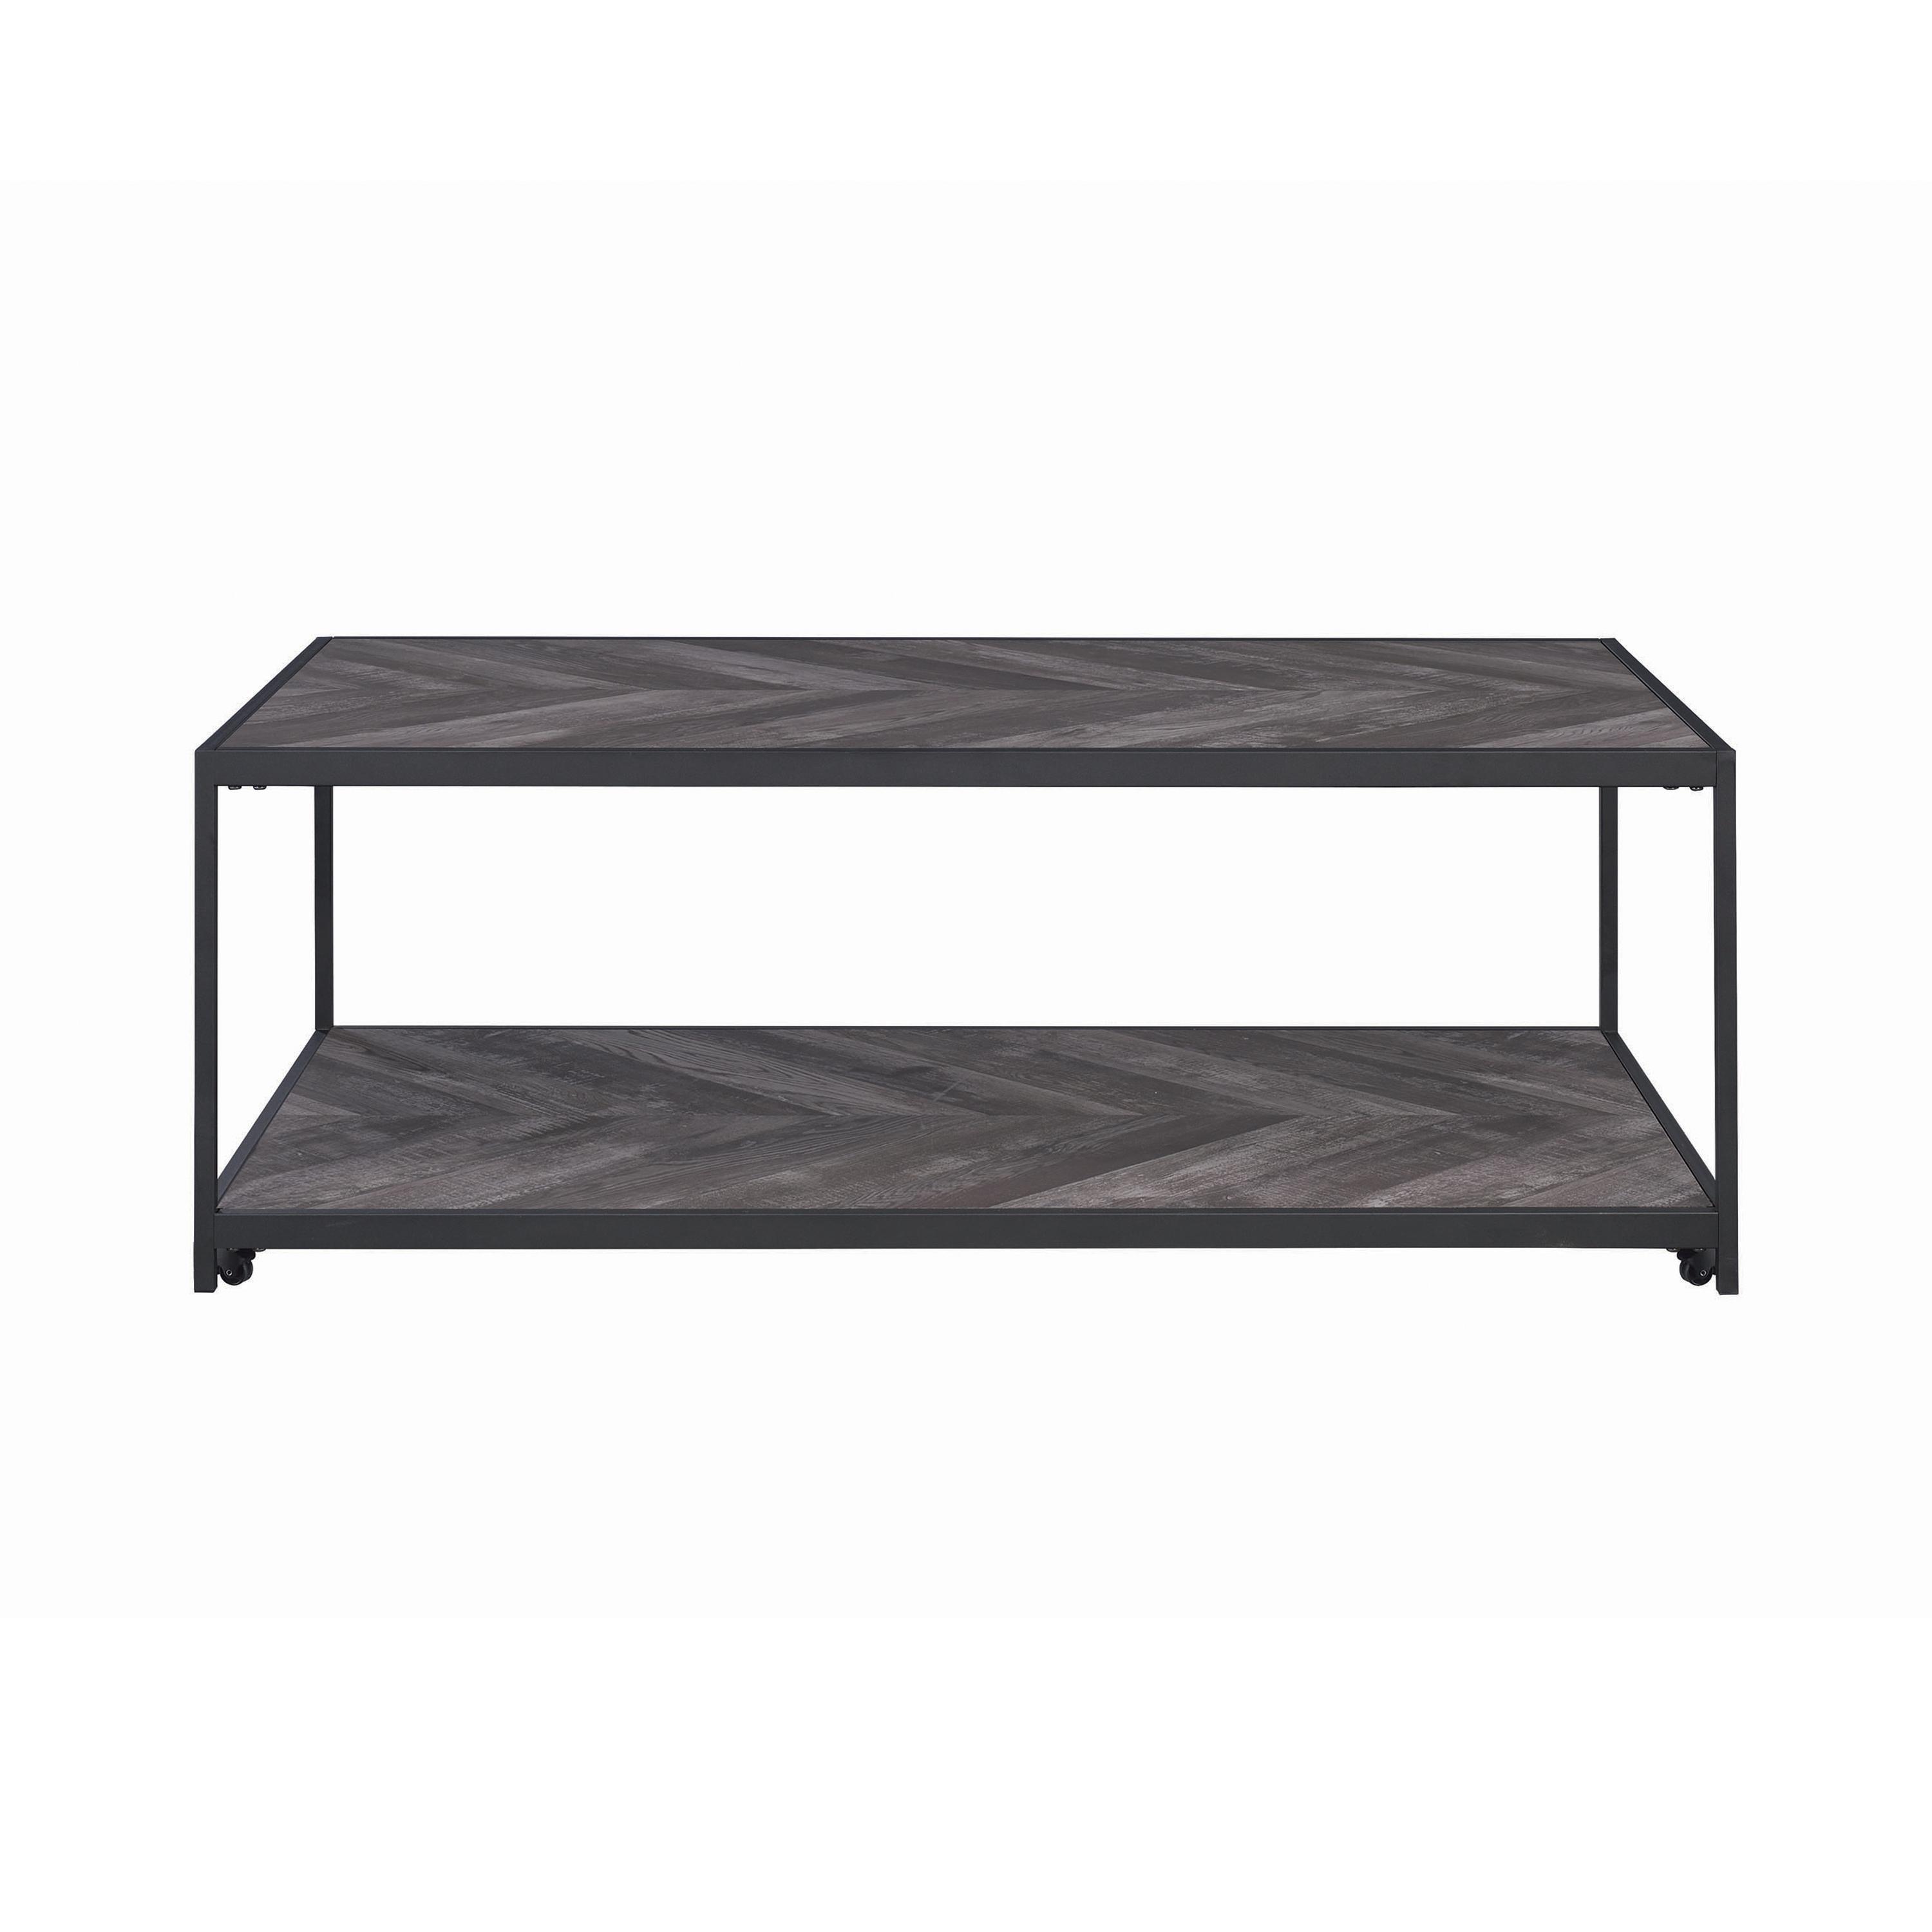 Modern Coffee Table 708168 708168 in Gray 